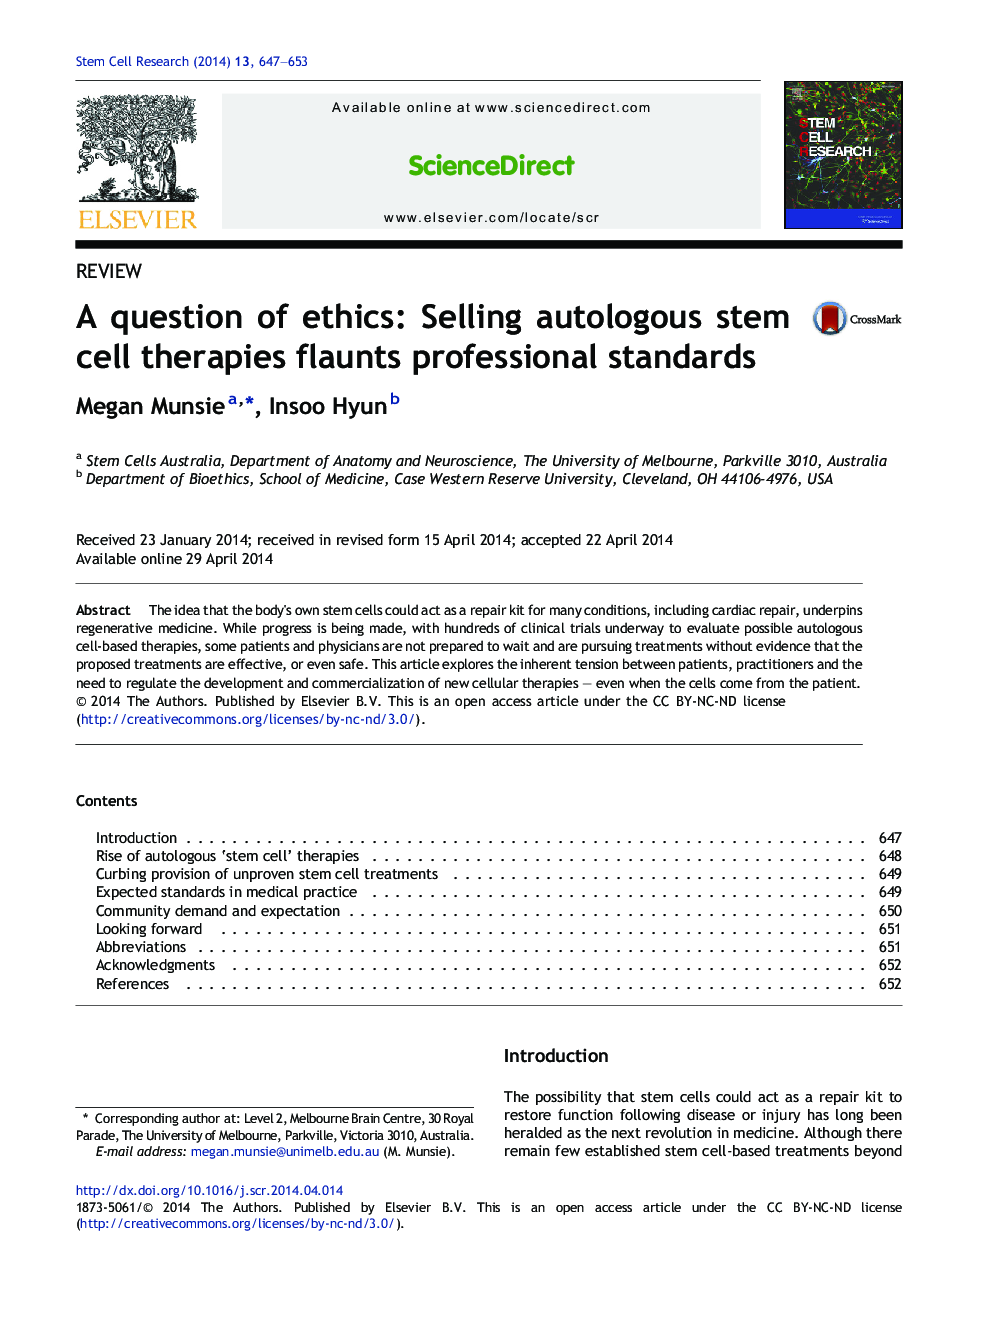 A question of ethics: Selling autologous stem cell therapies flaunts professional standards